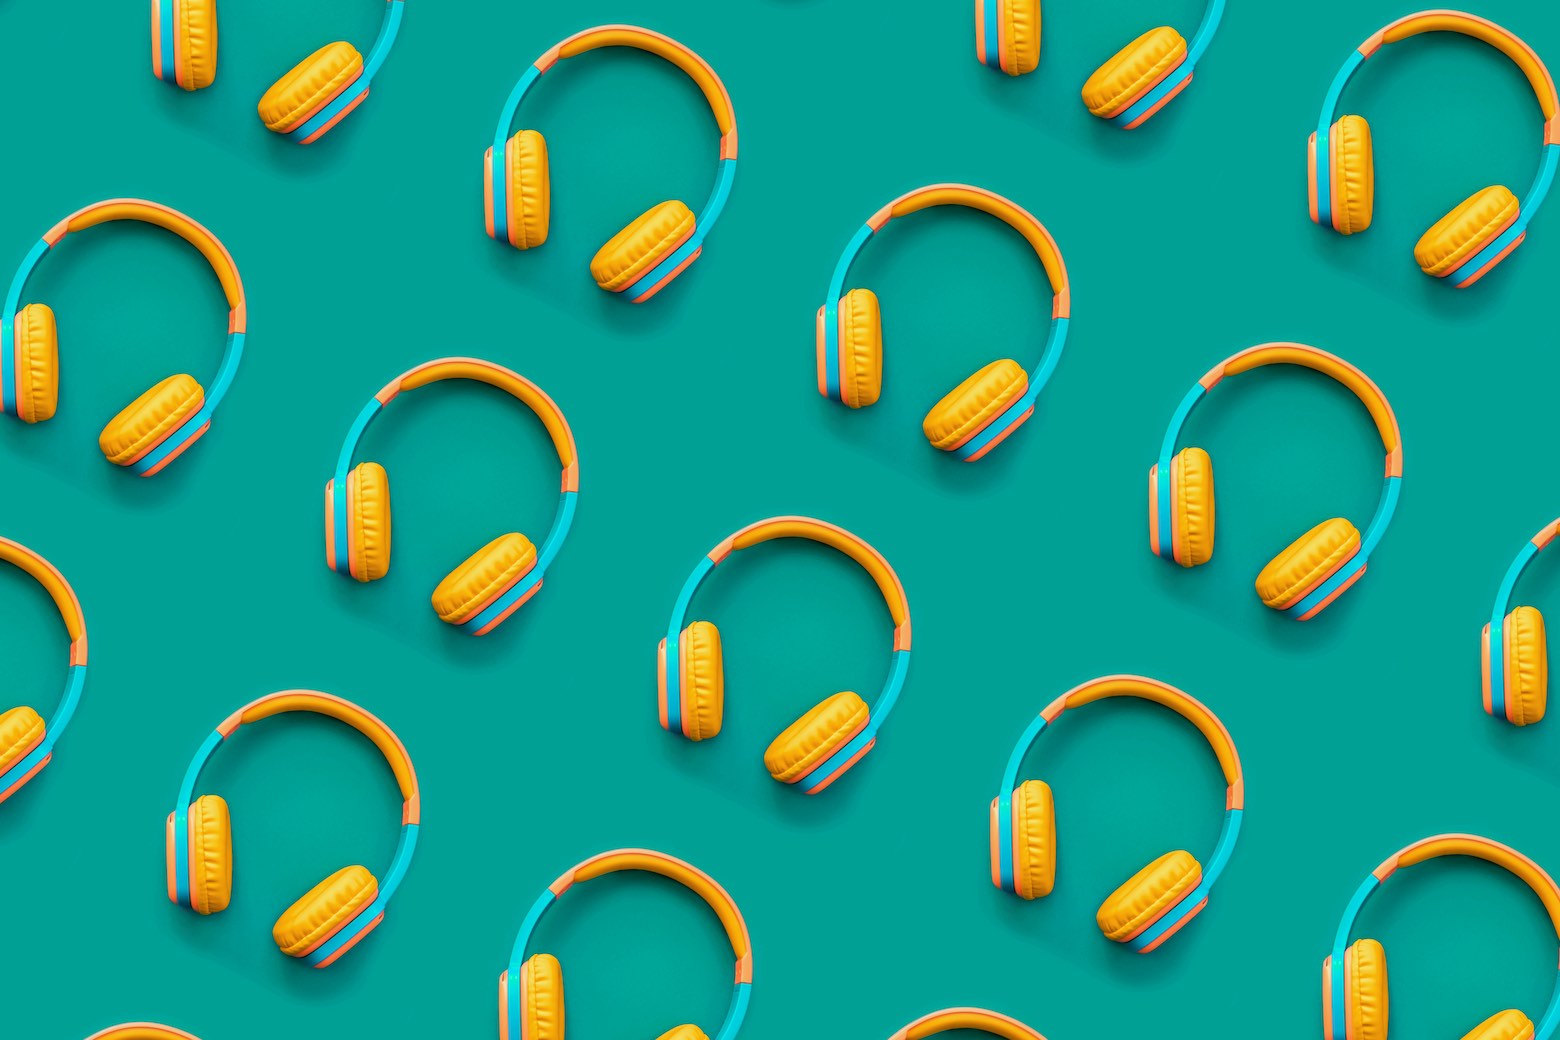 Listen to audiobooks. Blue and orange headphones laid out in a repeating pattern on a turquoise background.